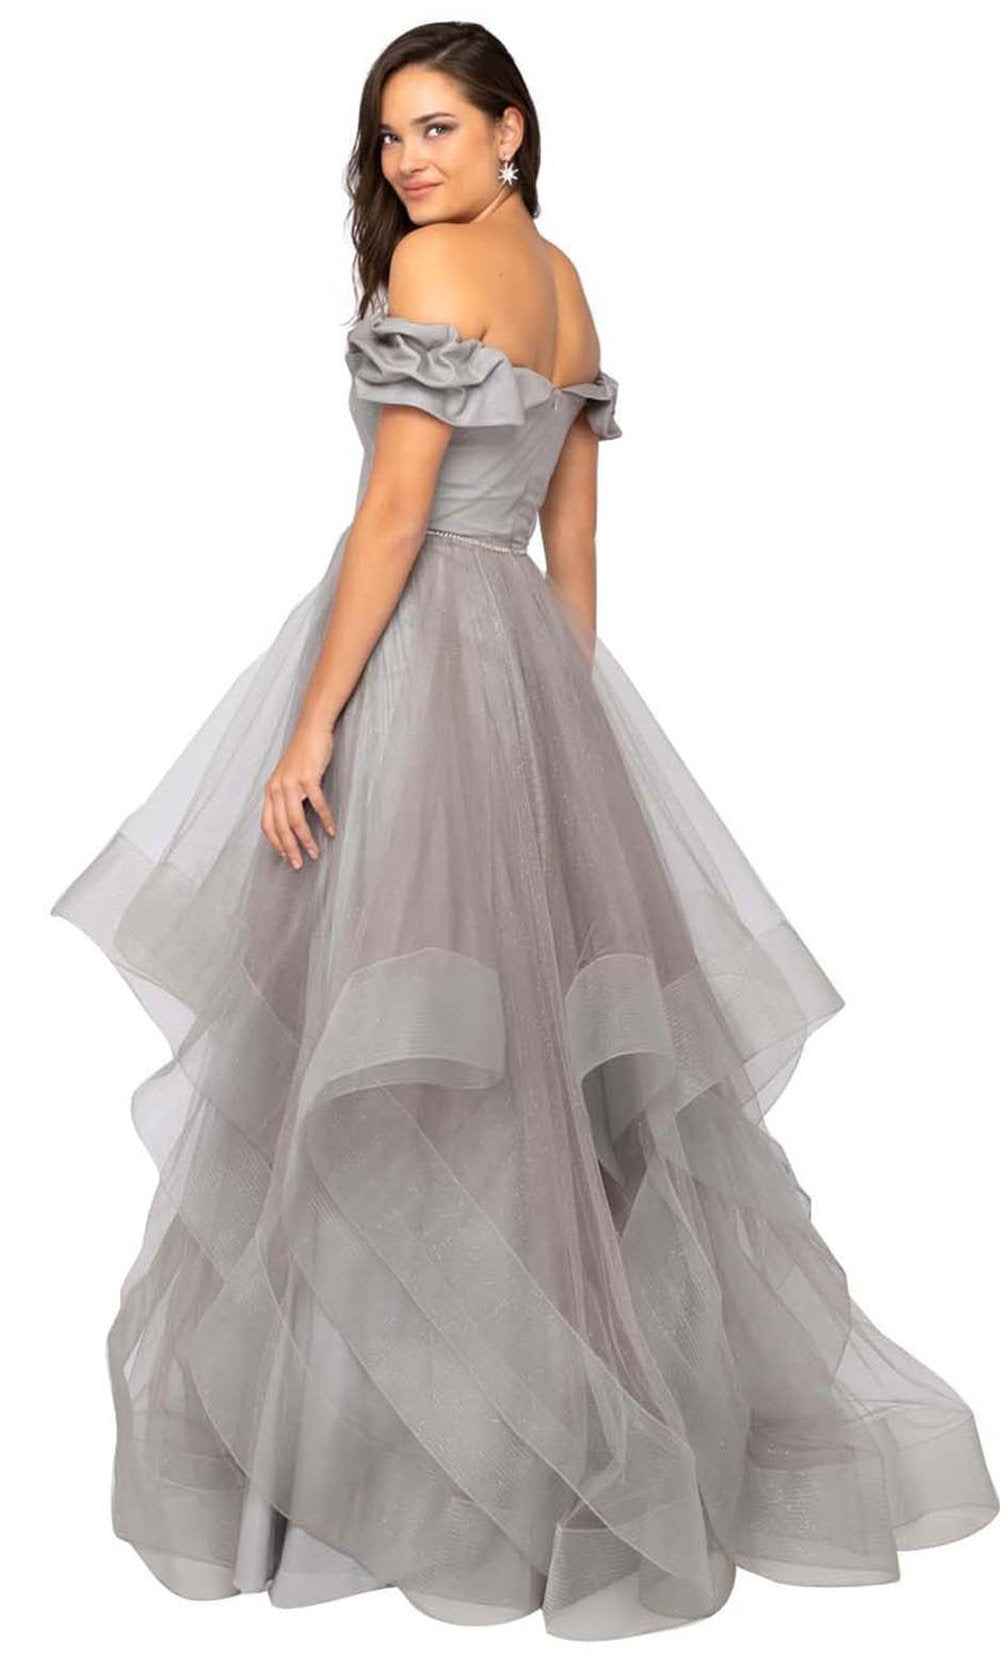 Terani Couture - Ruffled Off-Shoulder Tulle Ballgown 1911P8542 In Grey